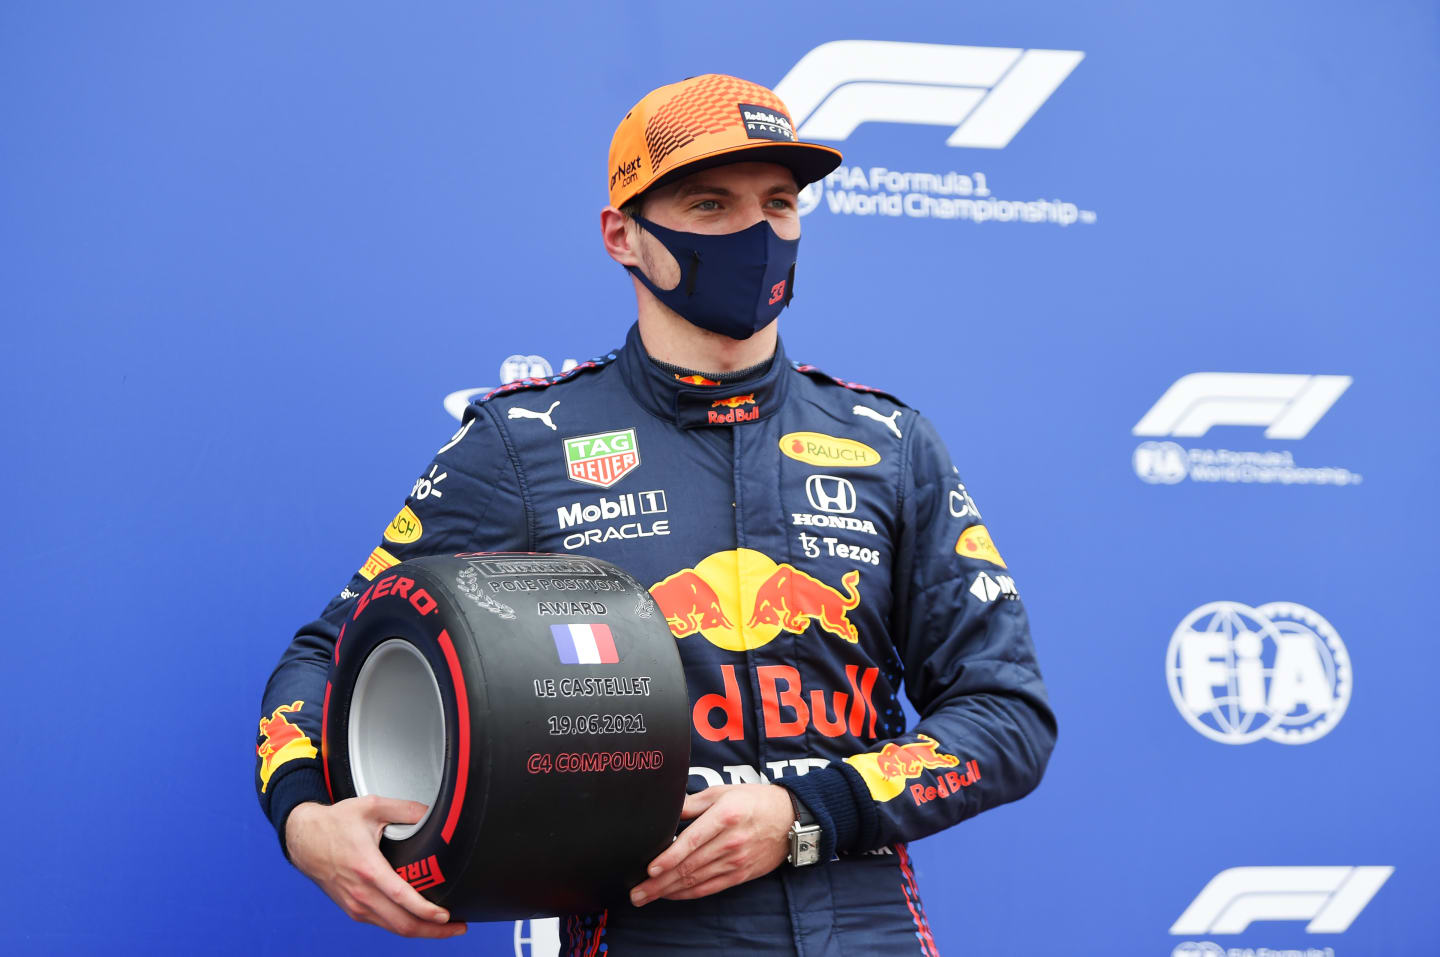 LE CASTELLET, FRANCE - JUNE 19: Pole position qualifier Max Verstappen of Netherlands and Red Bull Racing poses for a photo with the pole position award after qualifying ahead of the F1 Grand Prix of France at Circuit Paul Ricard on June 19, 2021 in Le Castellet, France. (Photo by Nicolas Tucat - Pool/Getty Images)